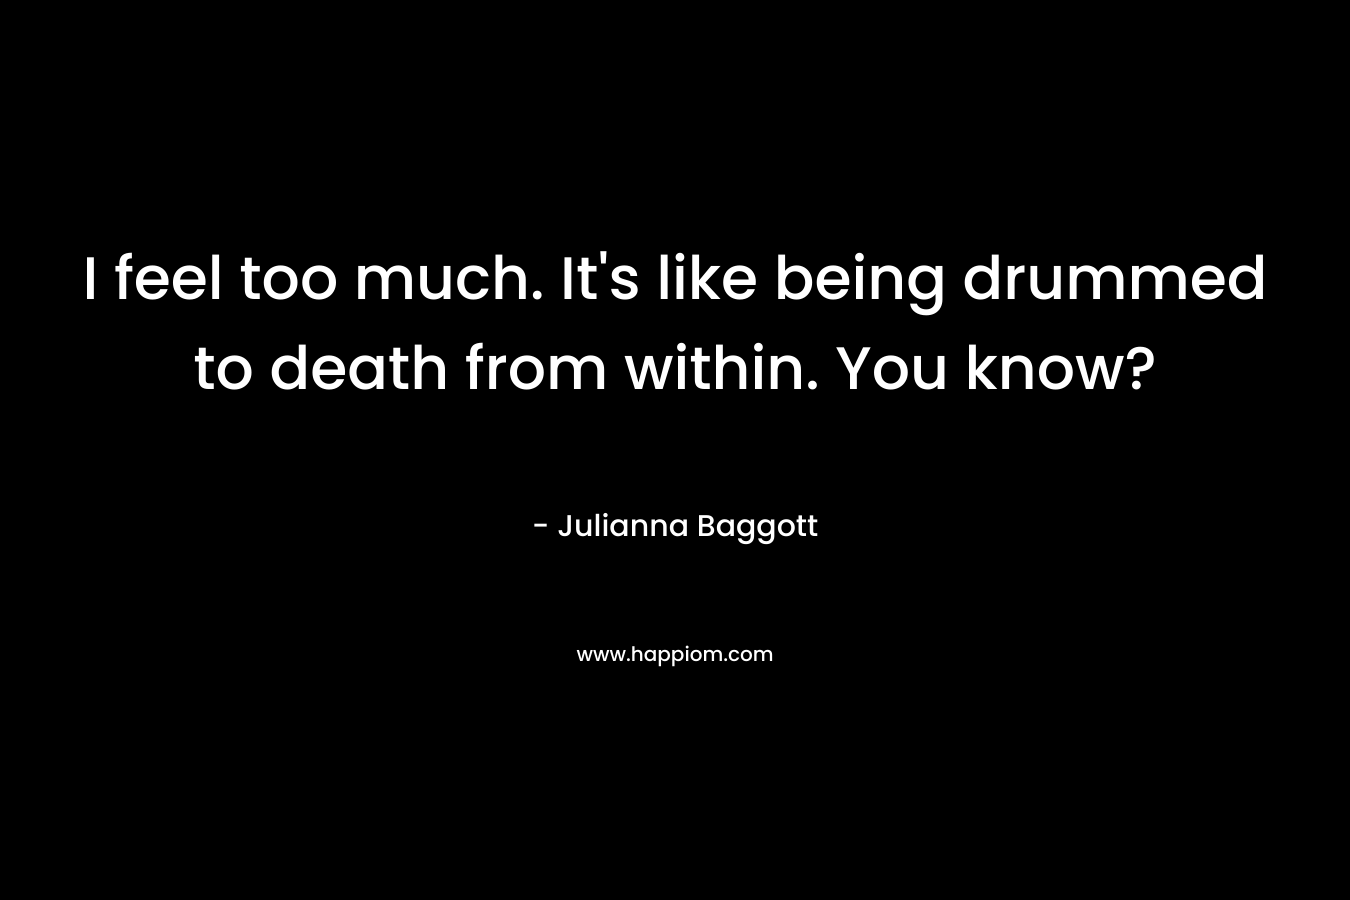 I feel too much. It's like being drummed to death from within. You know?